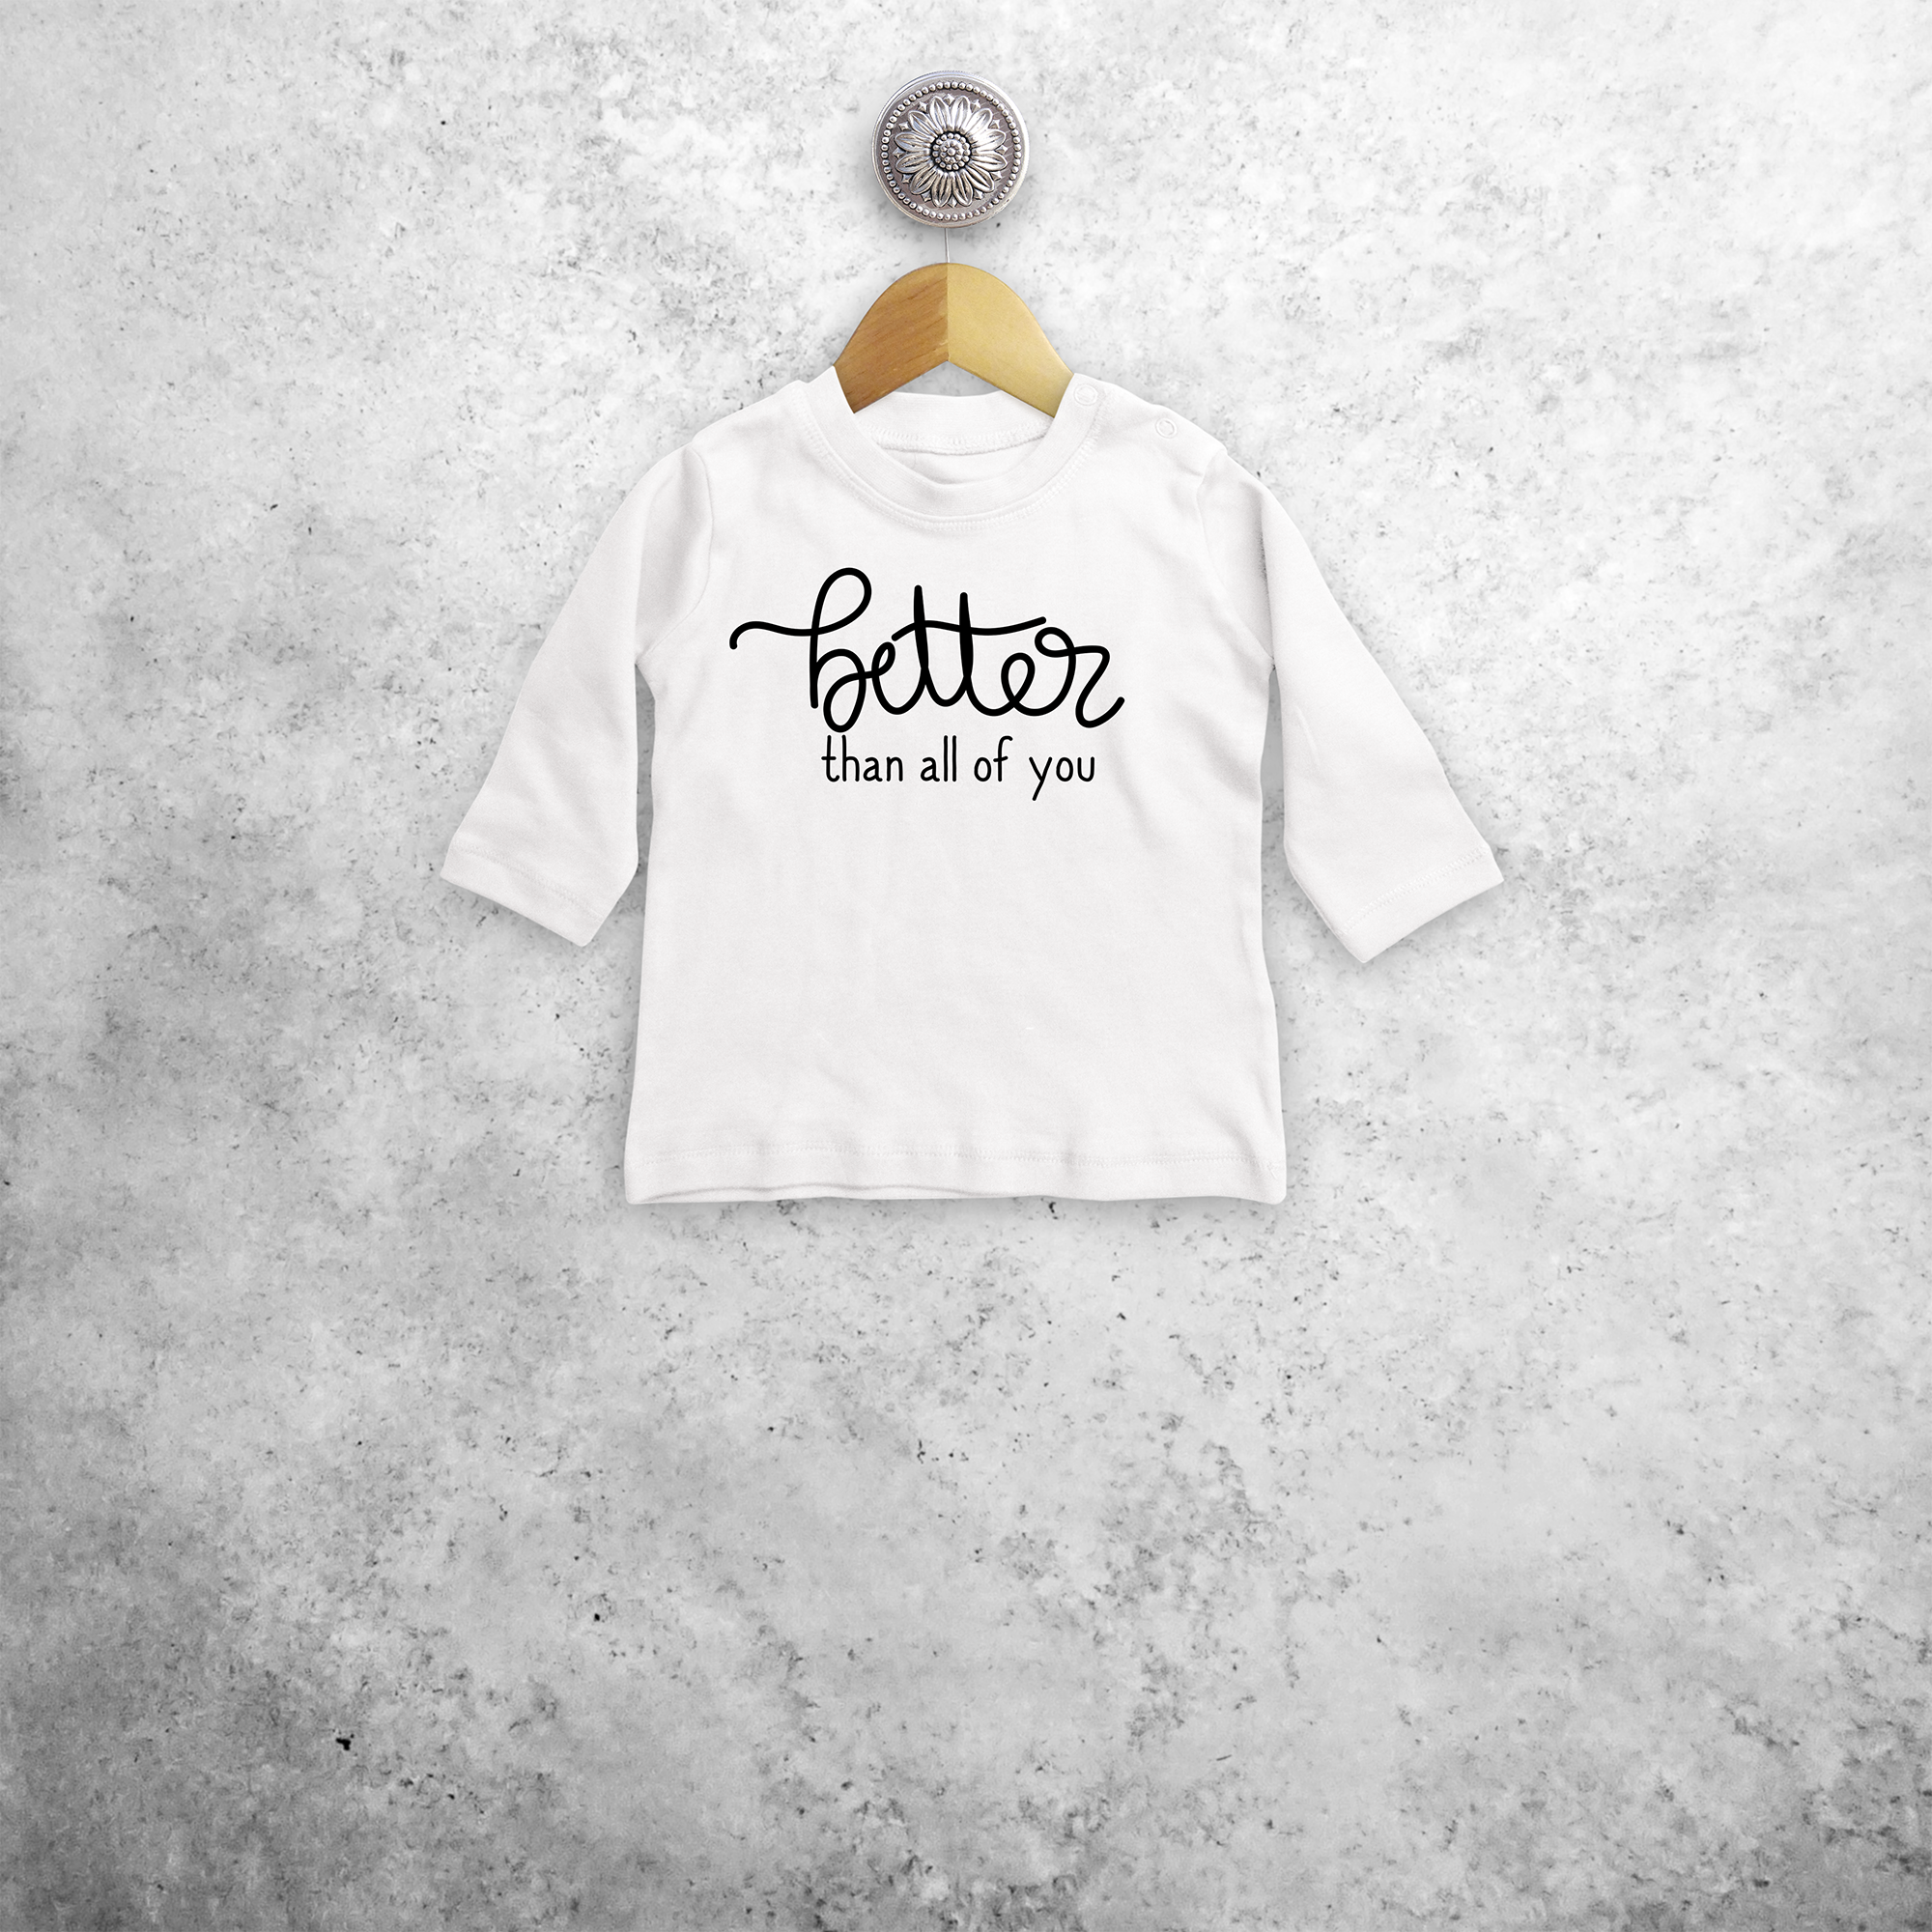 'Better than all of you' baby longsleeve shirt